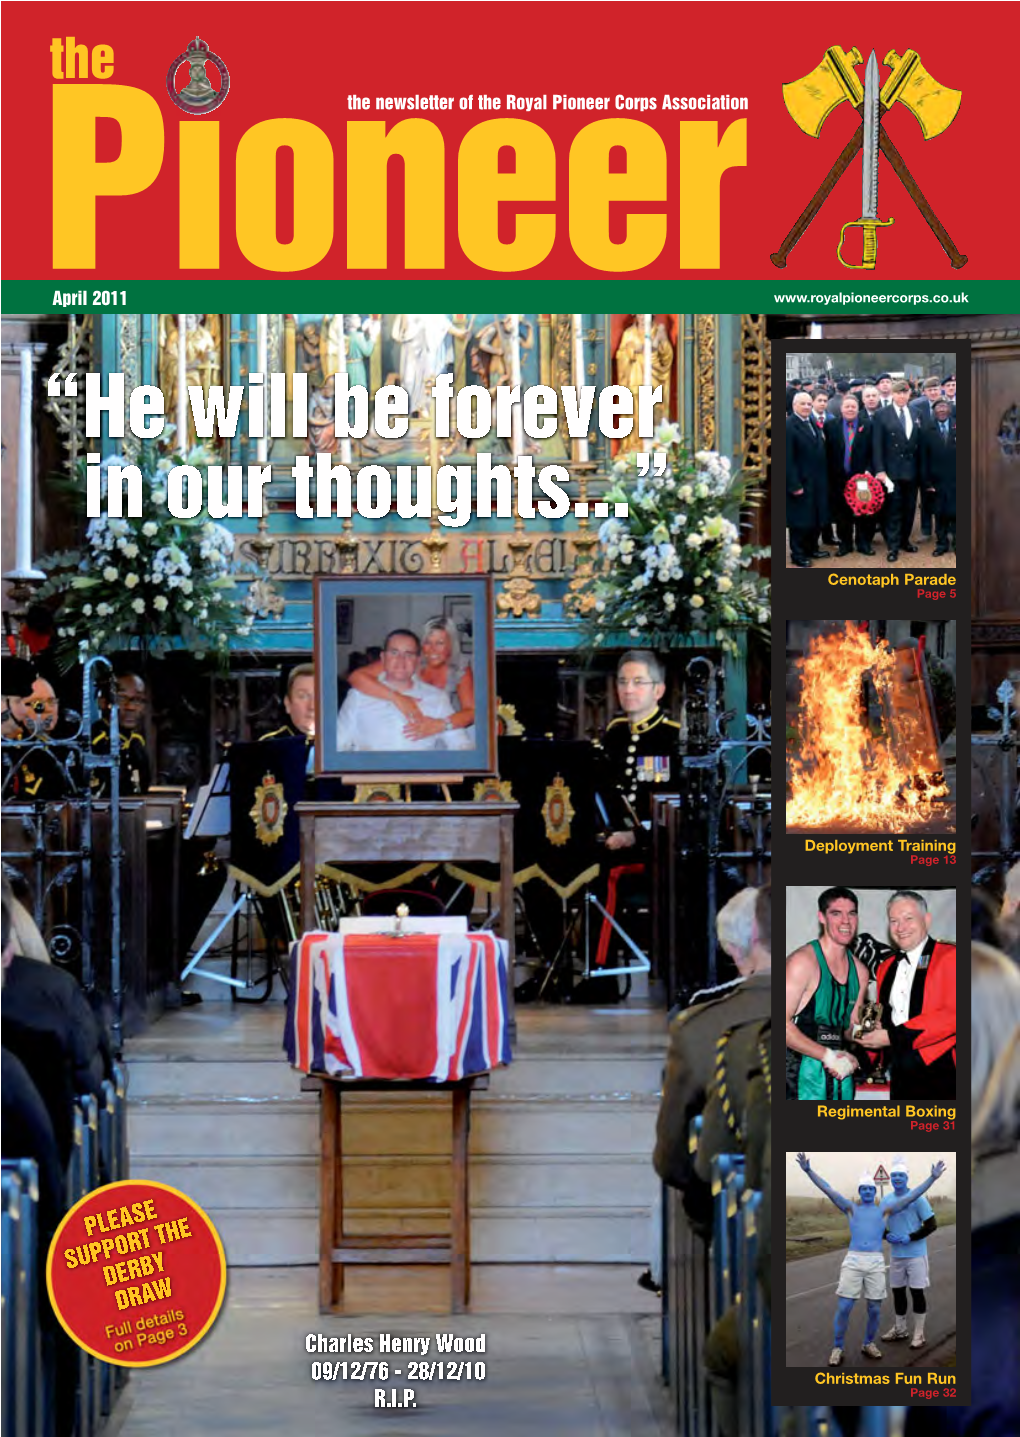 The Pioneerthe Newsletter of the Royal Pioneer Corps Association April 2011